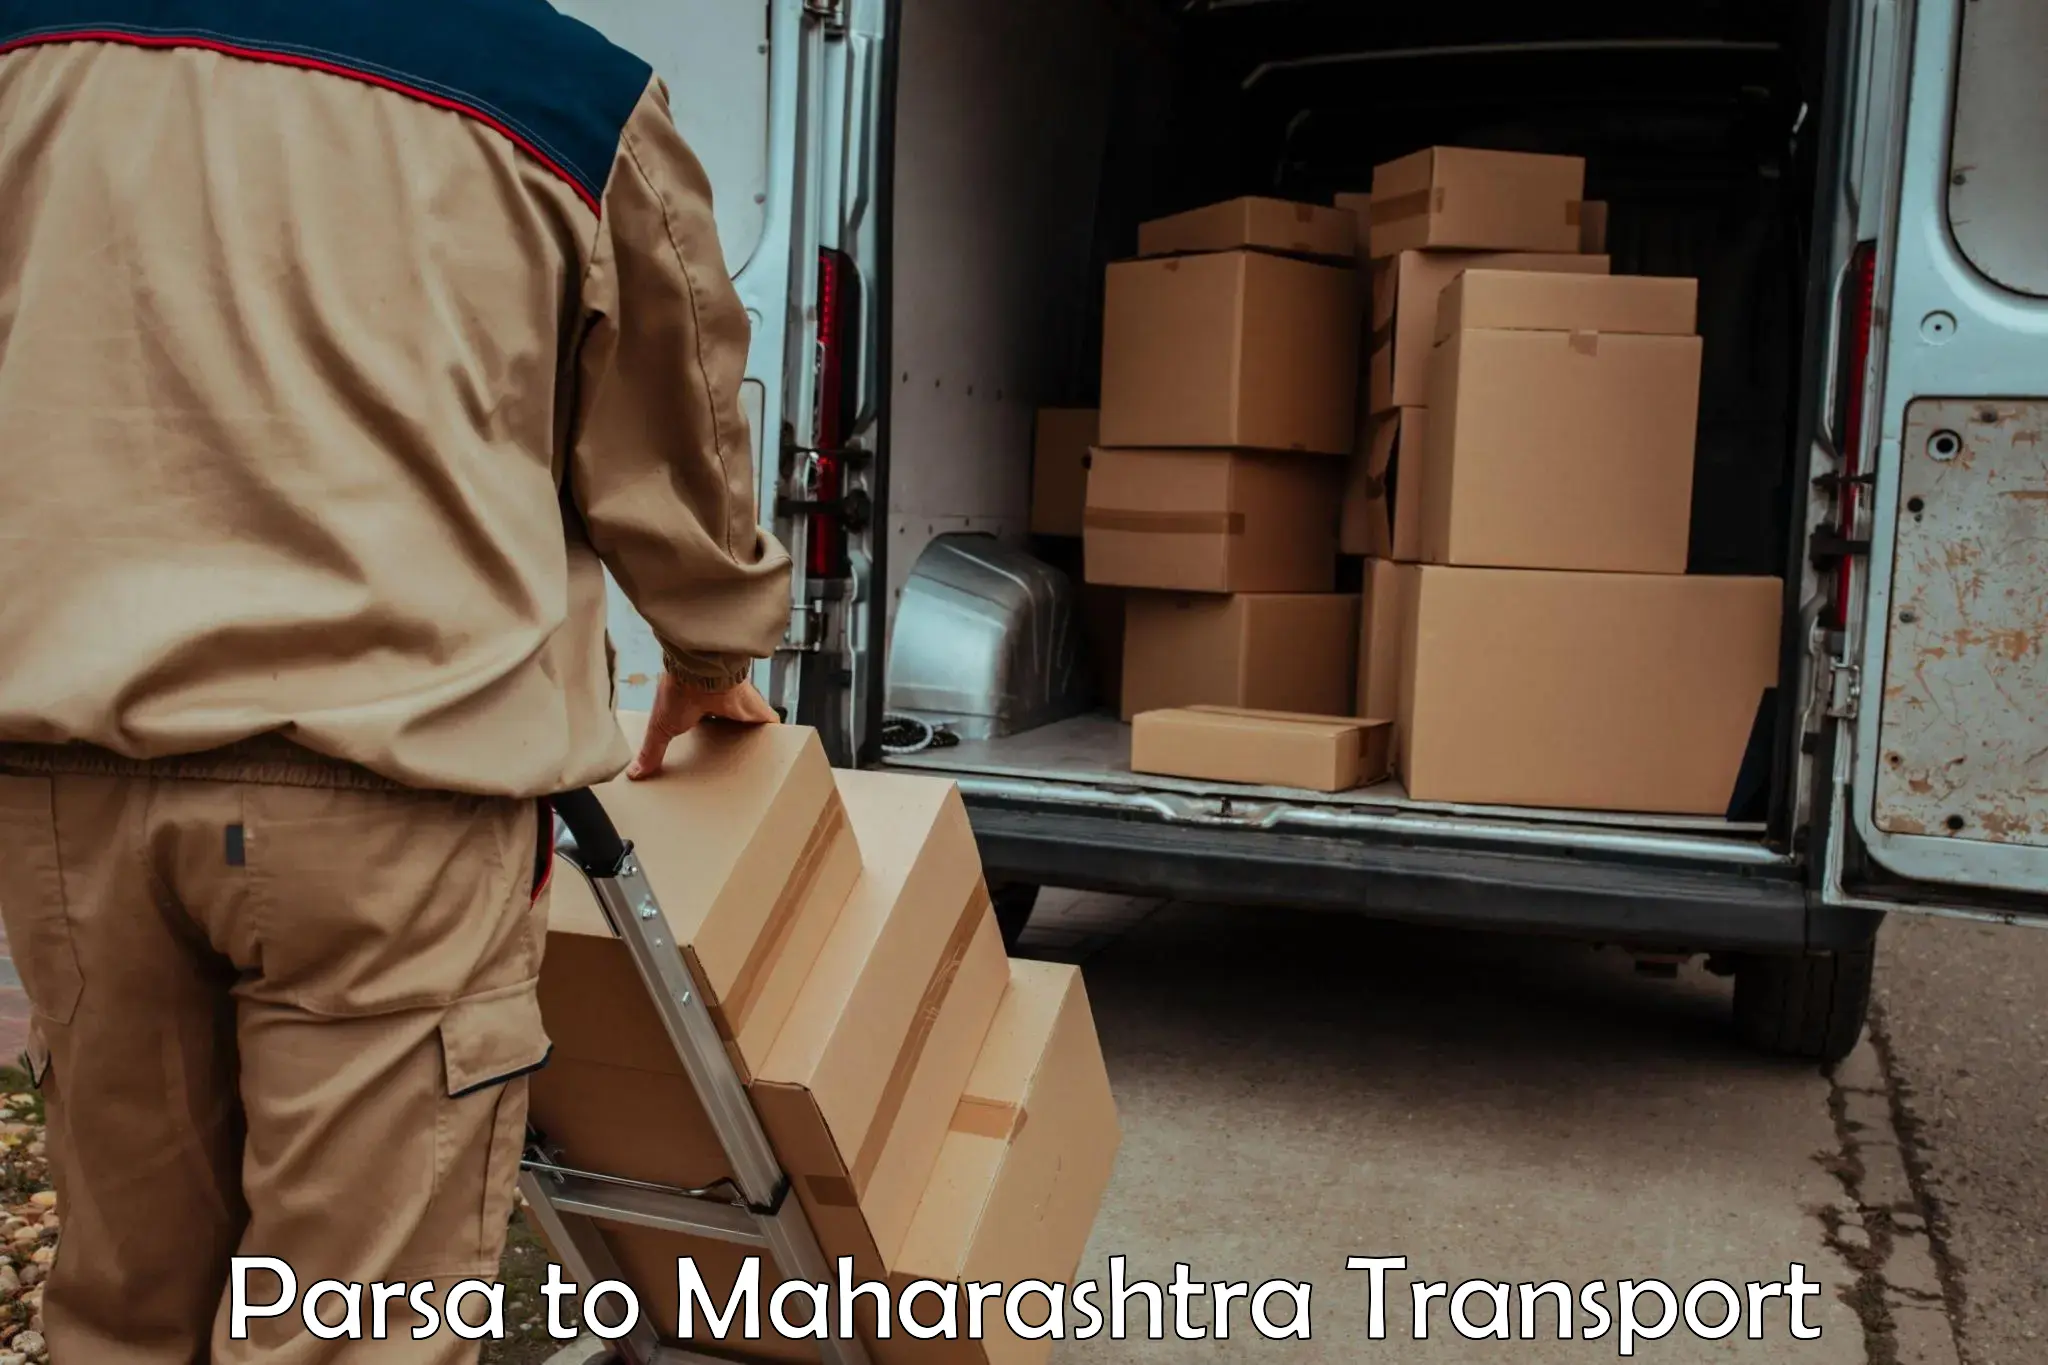 Truck transport companies in India Parsa to Chimur